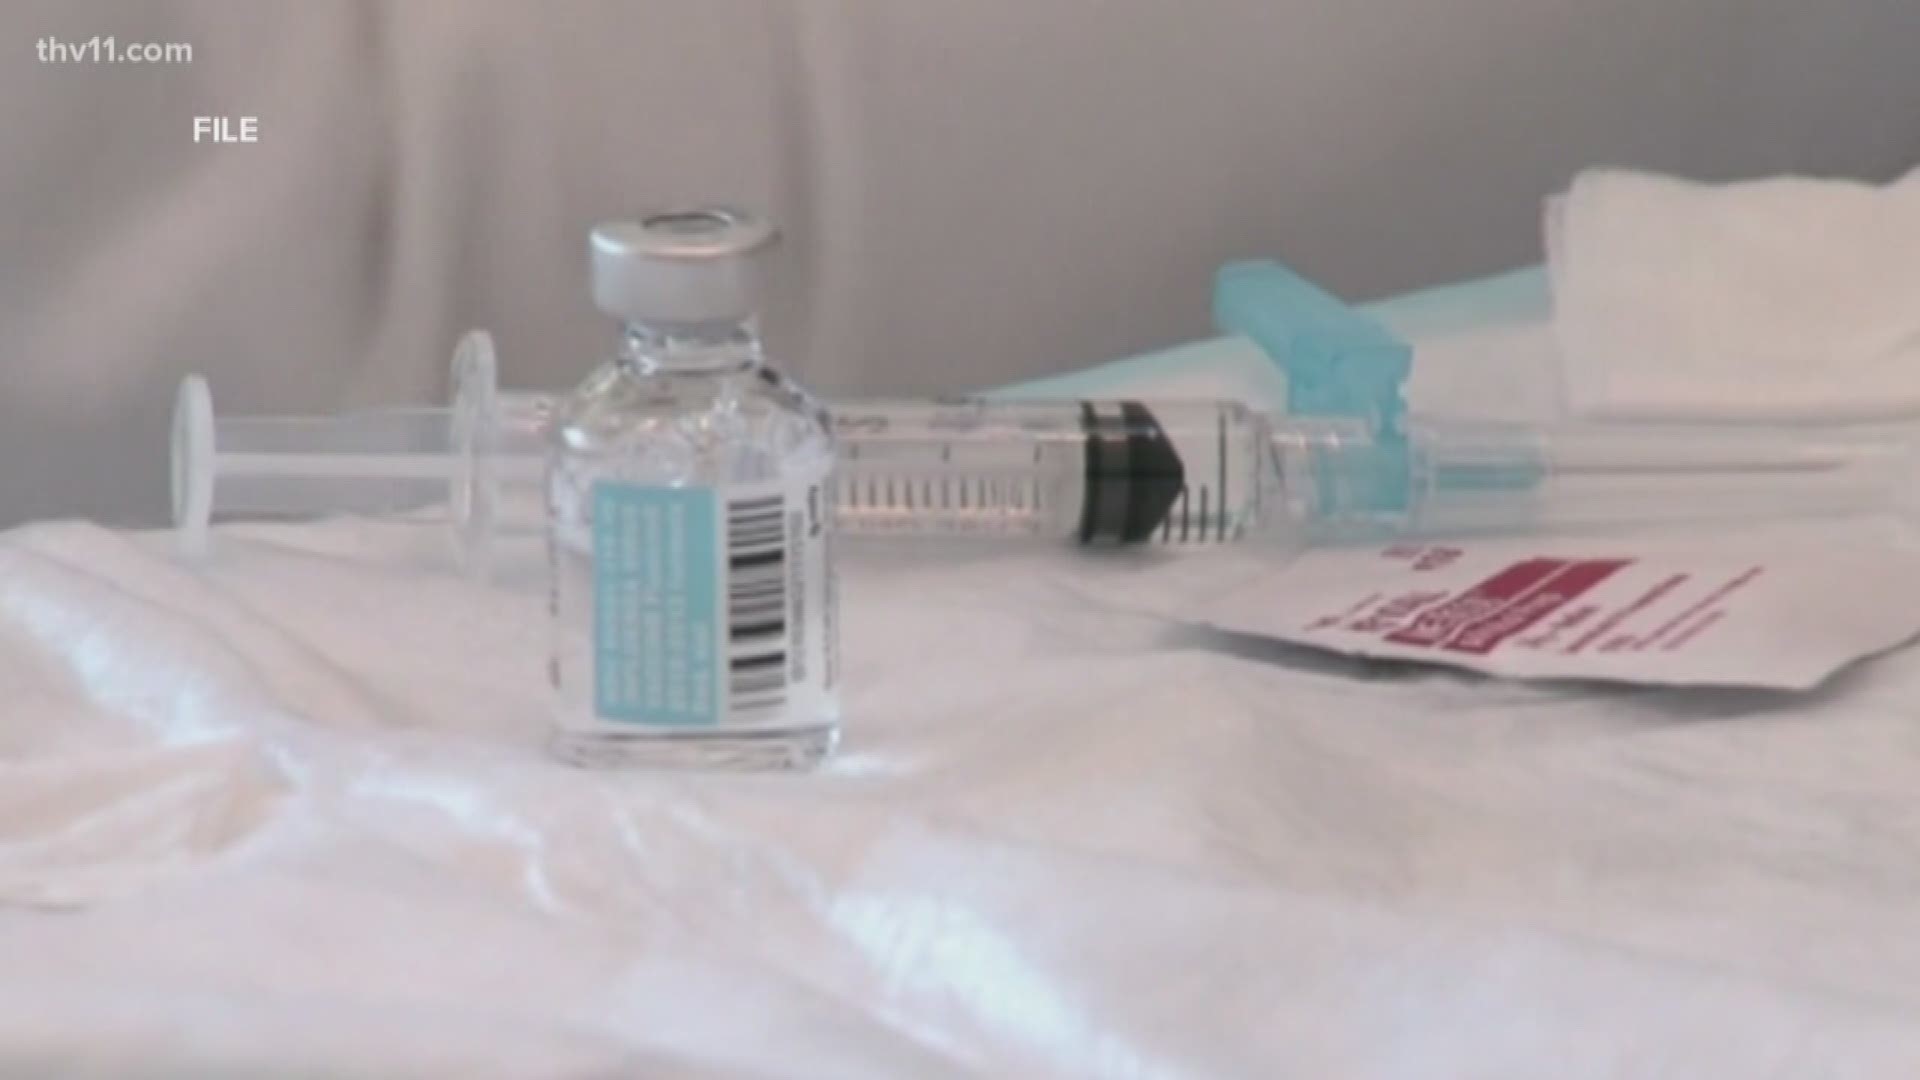 The Horatio School District is being hit especially hard by the flu. Schools are closed the rest of the week after more than 300 students were out sick on Jan. 29.